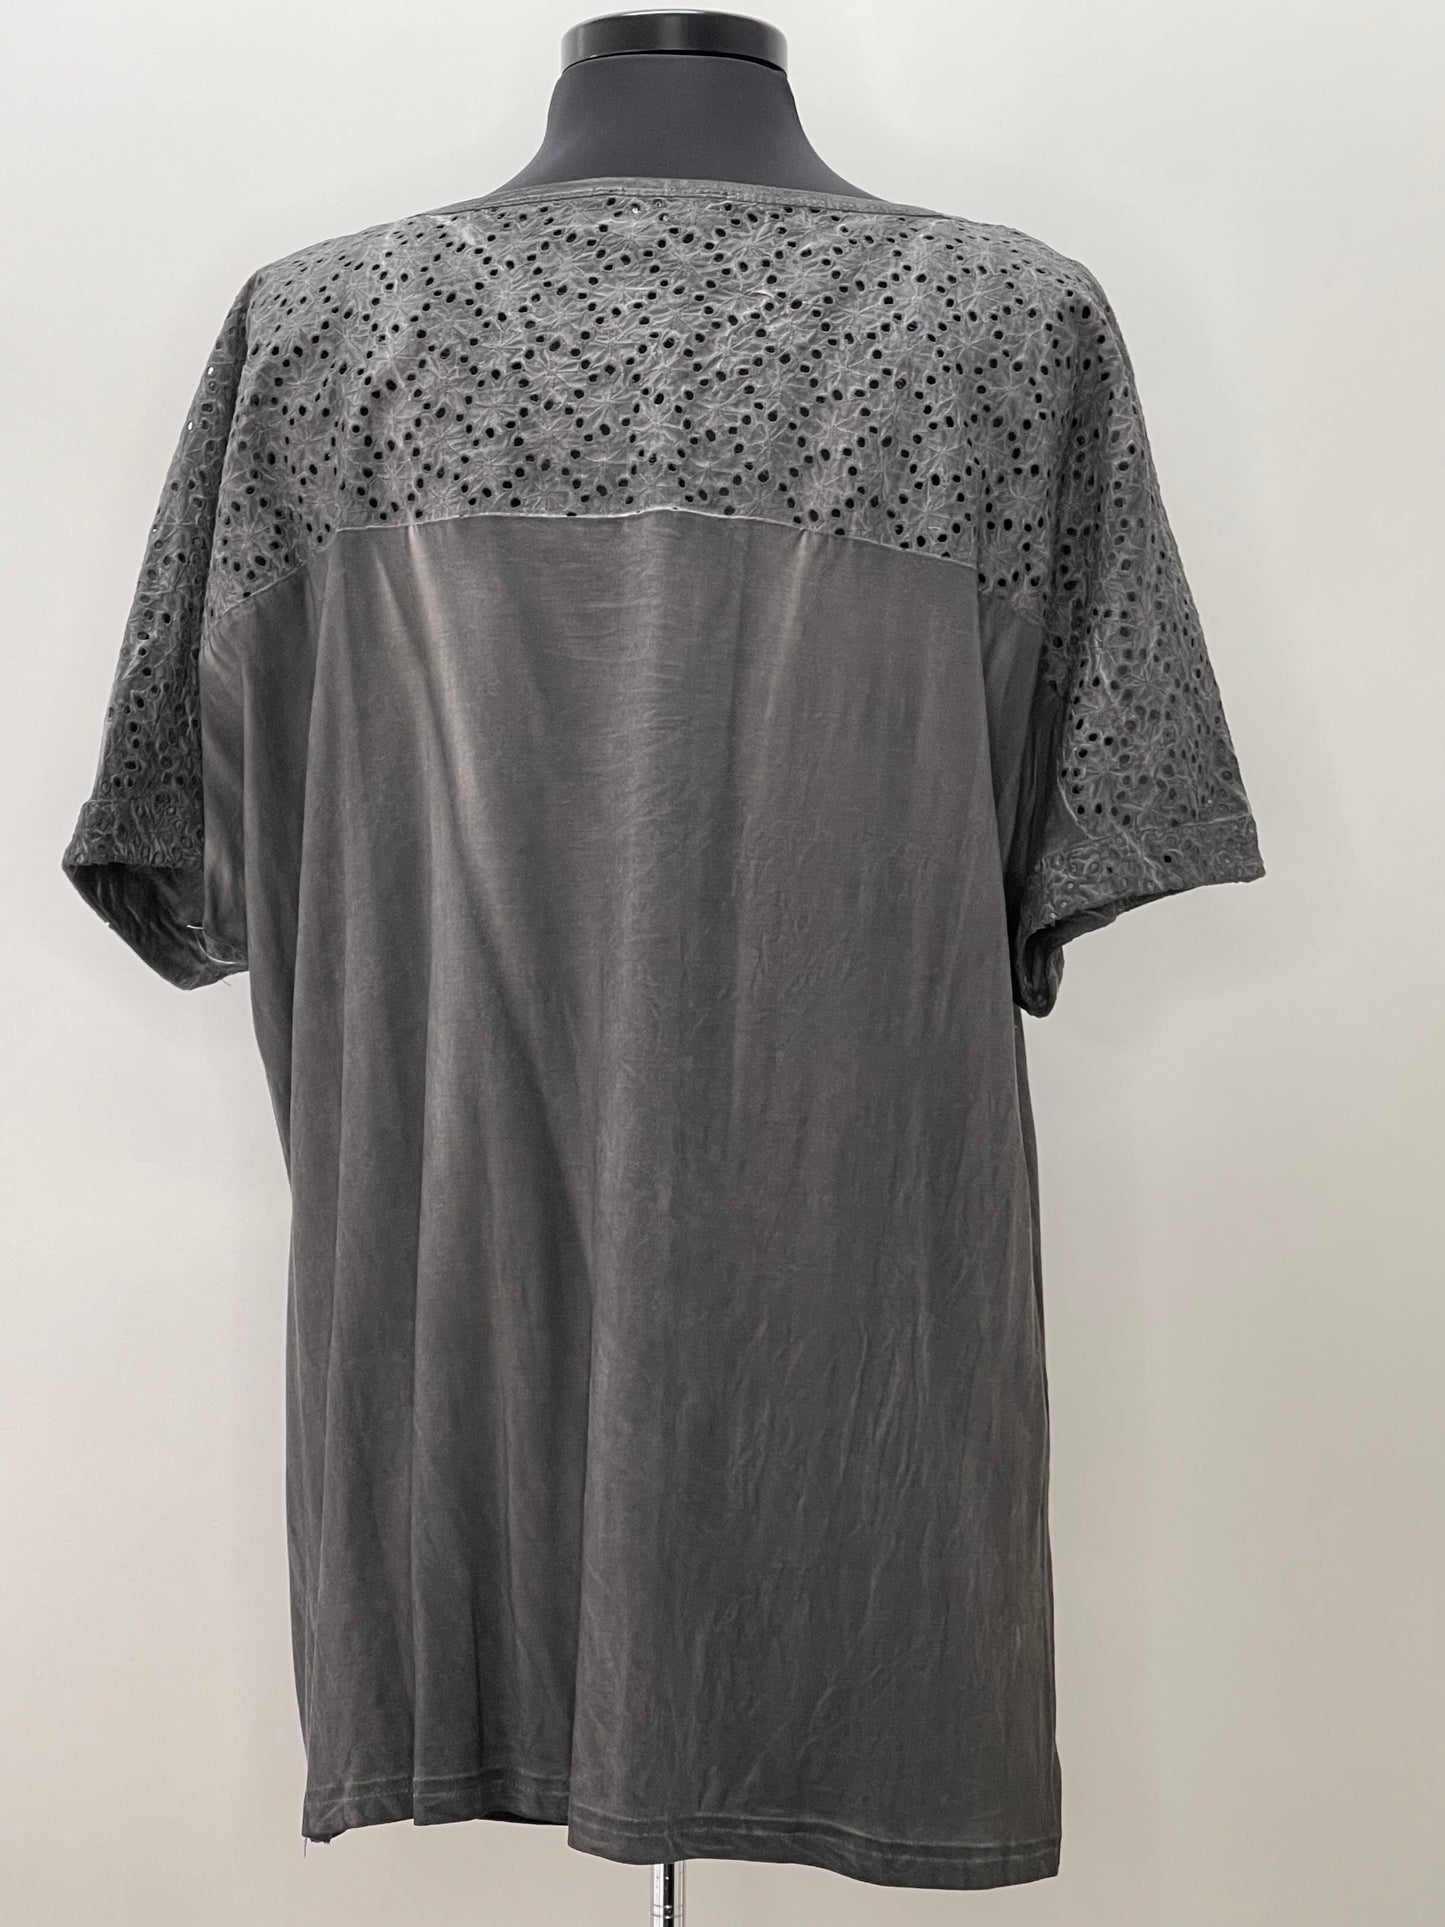 Short Sleeve Mineral Wash Top with Star